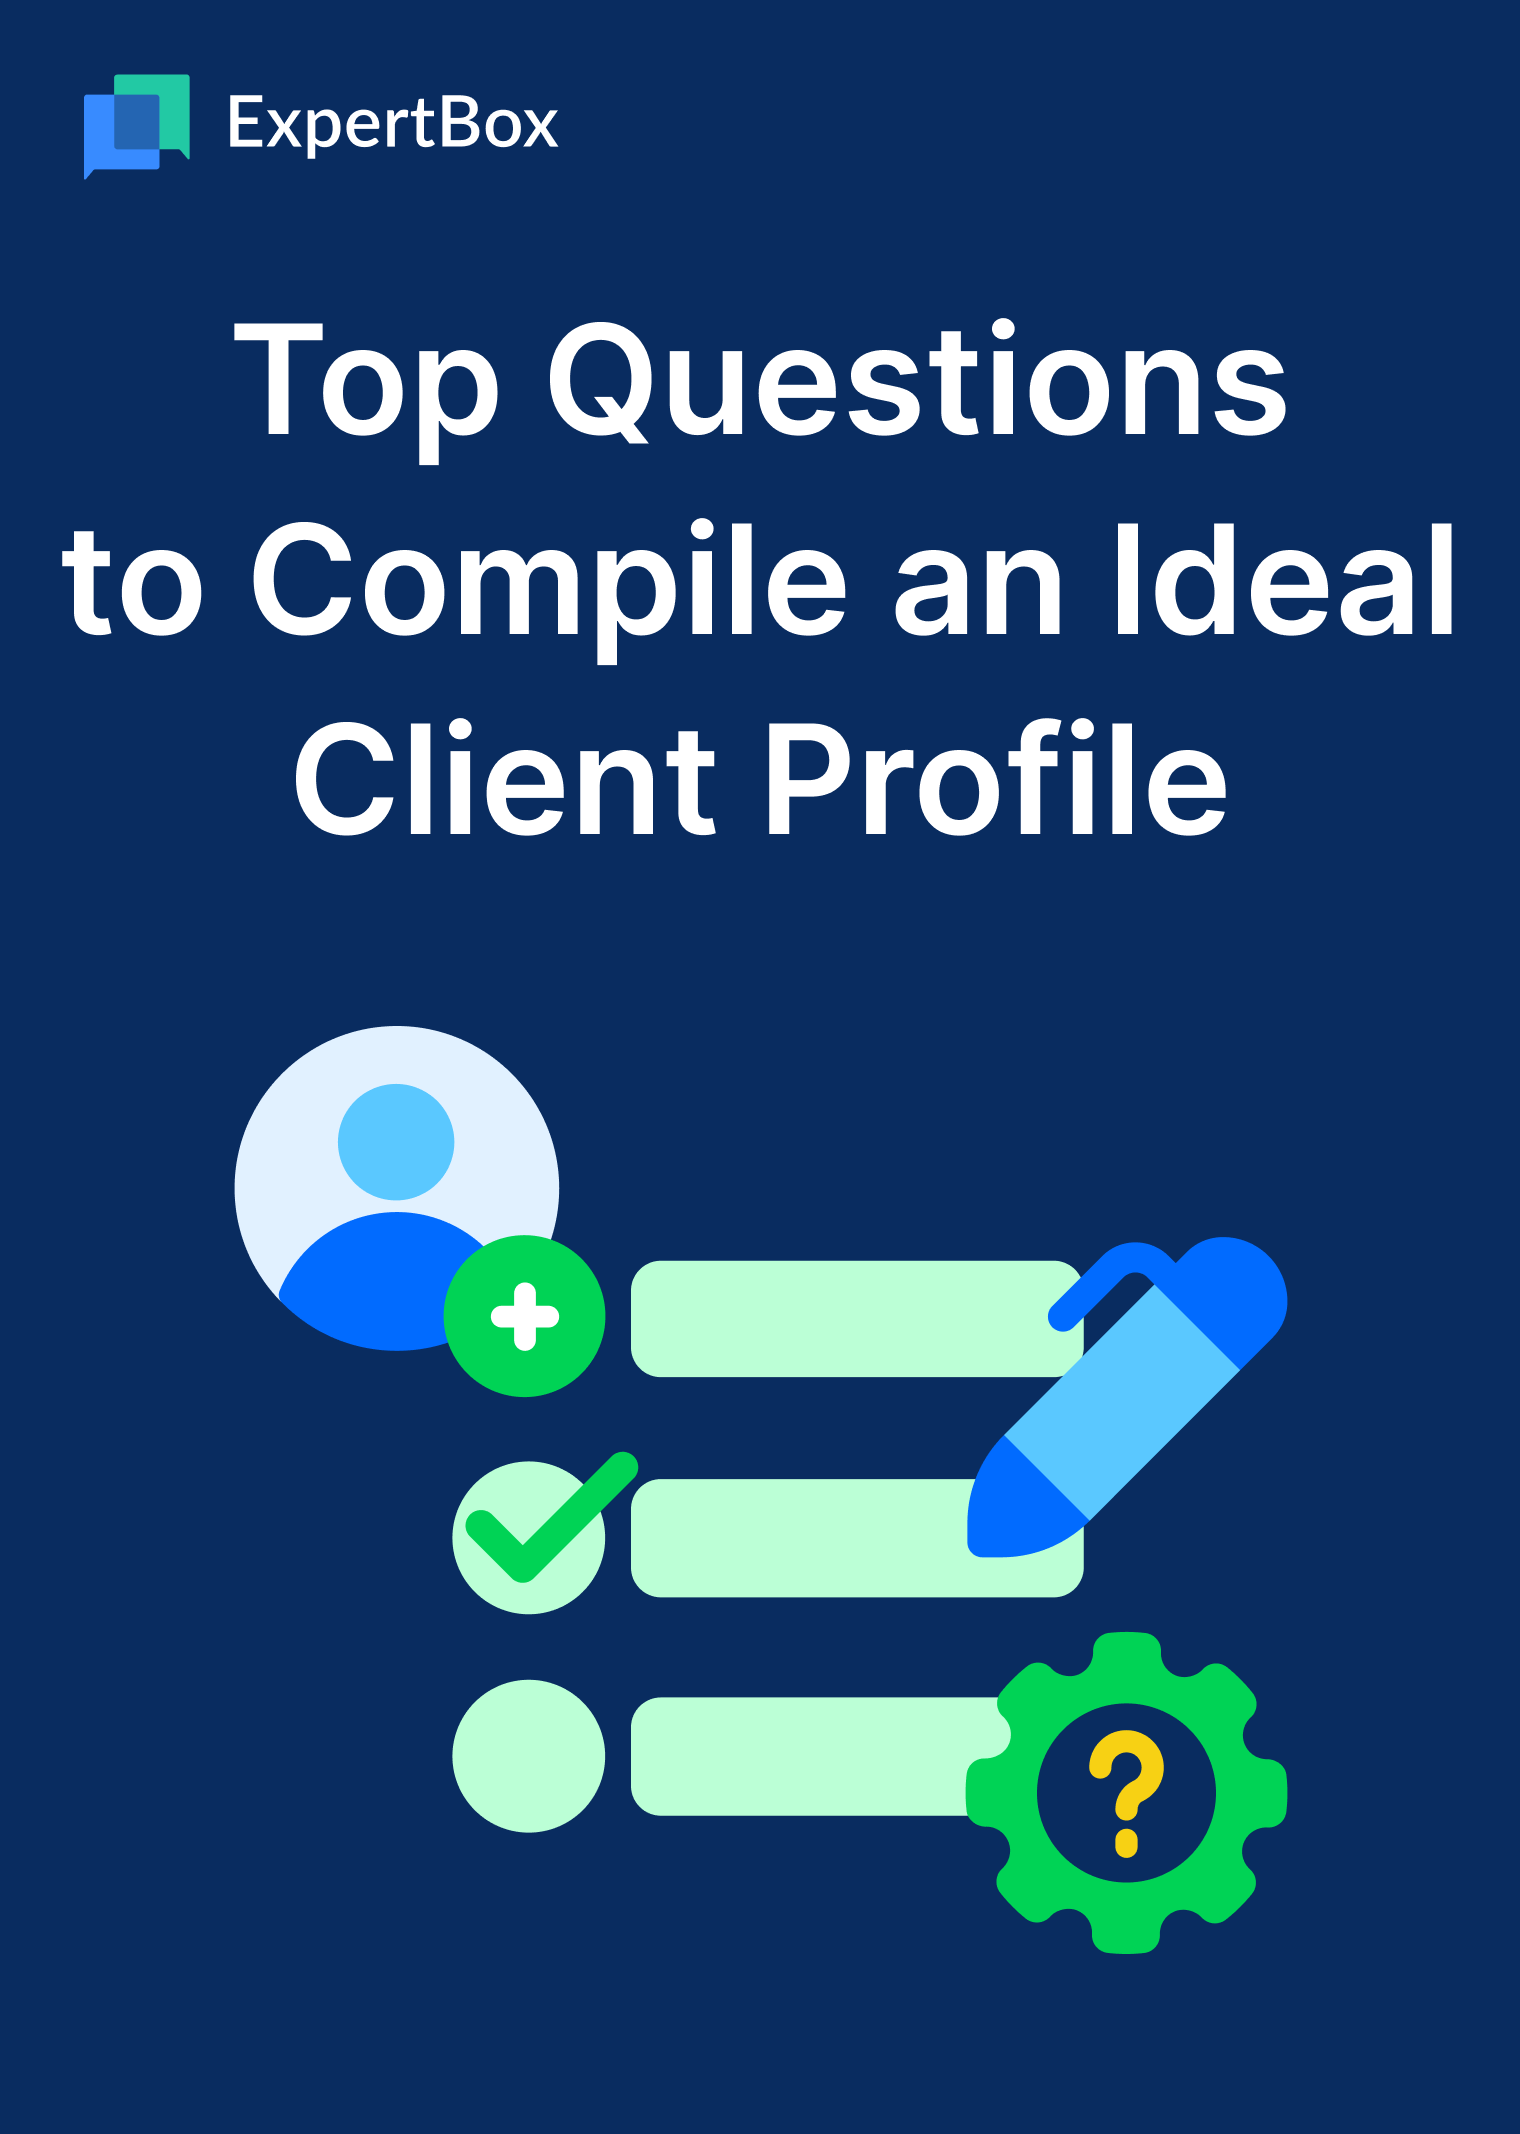 Top Questions to Compile an Ideal Client Profile